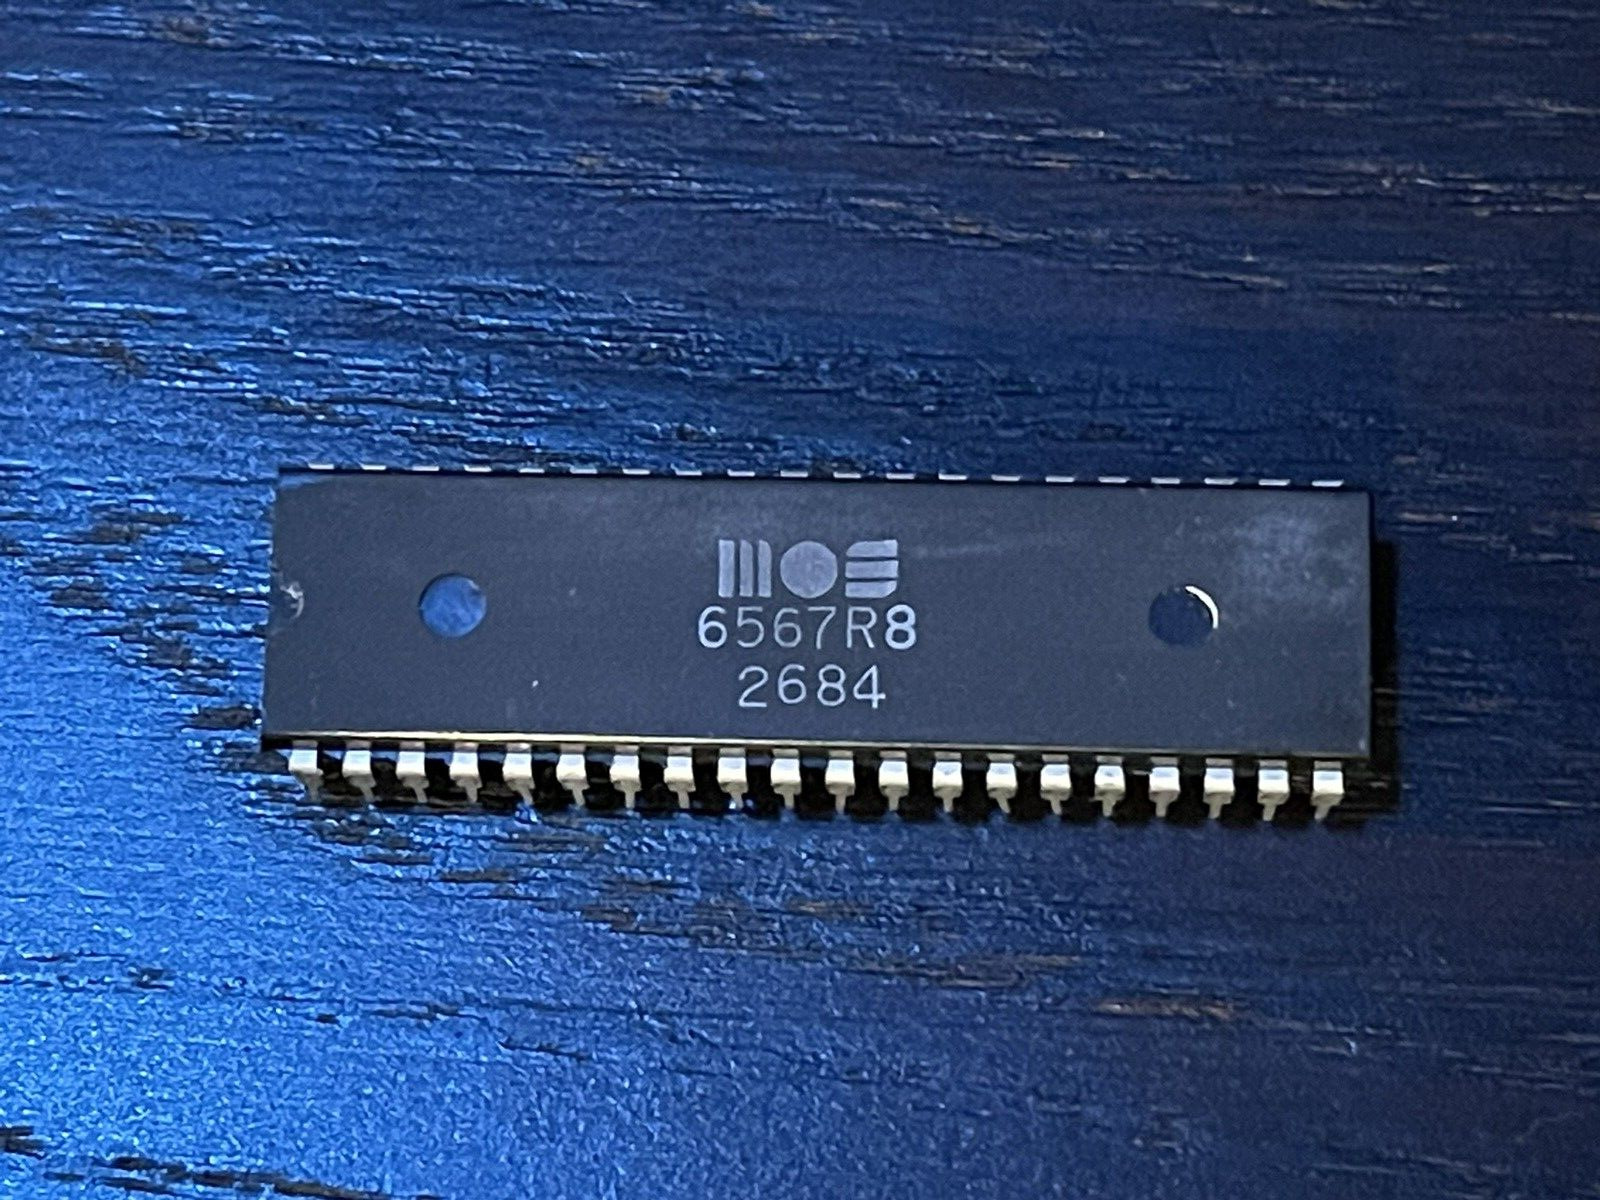 Genuine MOS 6567 R8 VICII chip for Commodore 64 | Tested & Working | US Seller